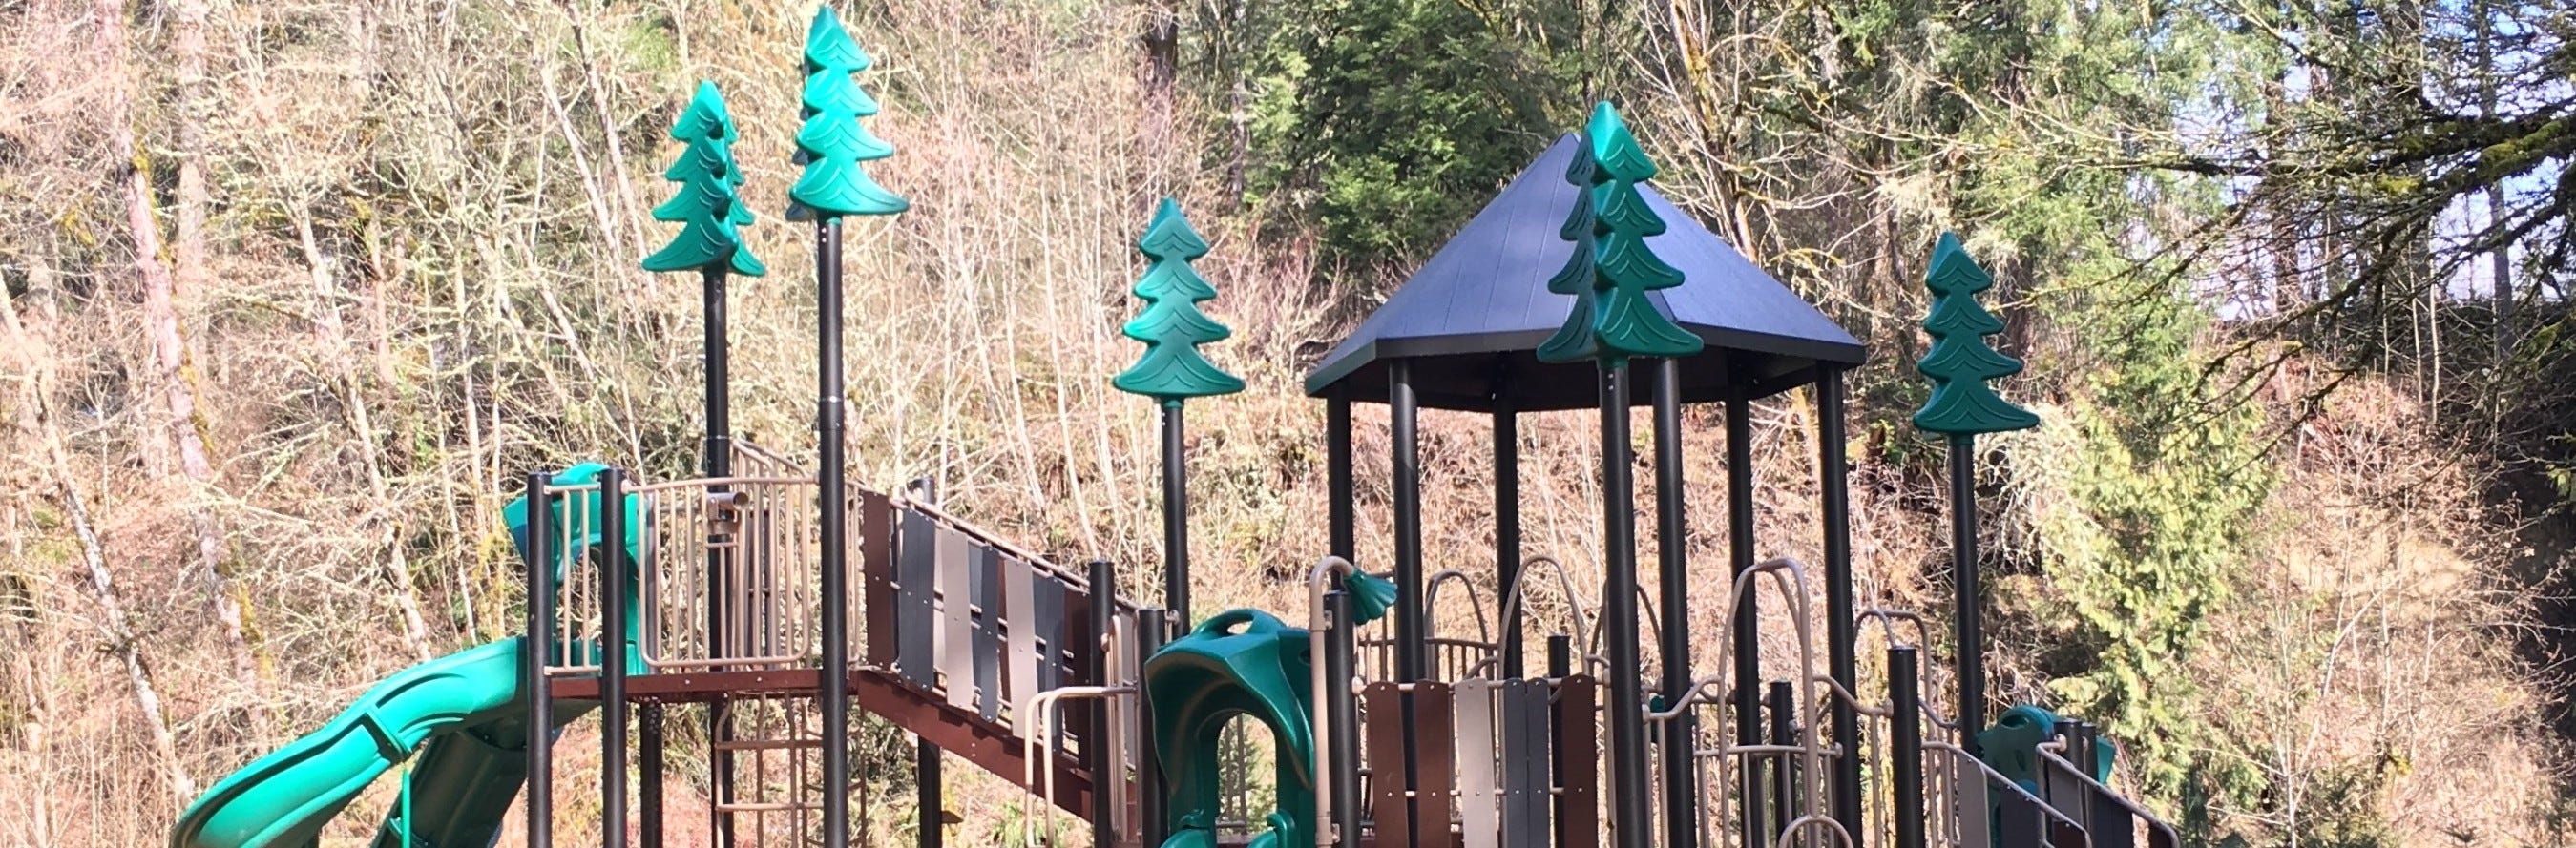 Clackamas County, Oregon, Brings Nature to Kids with New Nature-Themed Playground